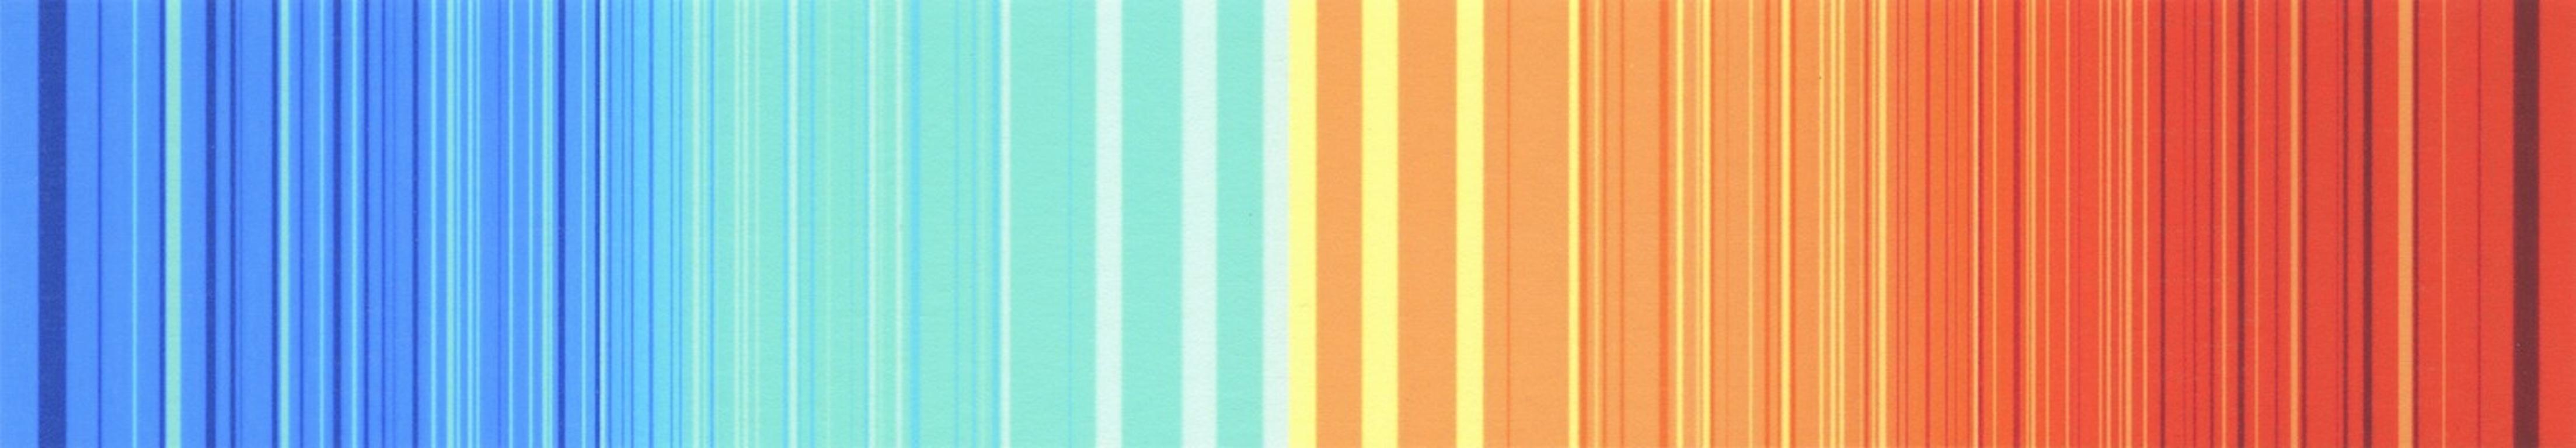 "The Complements 1", abstract, polychromatic, stripes, blue, orange, print